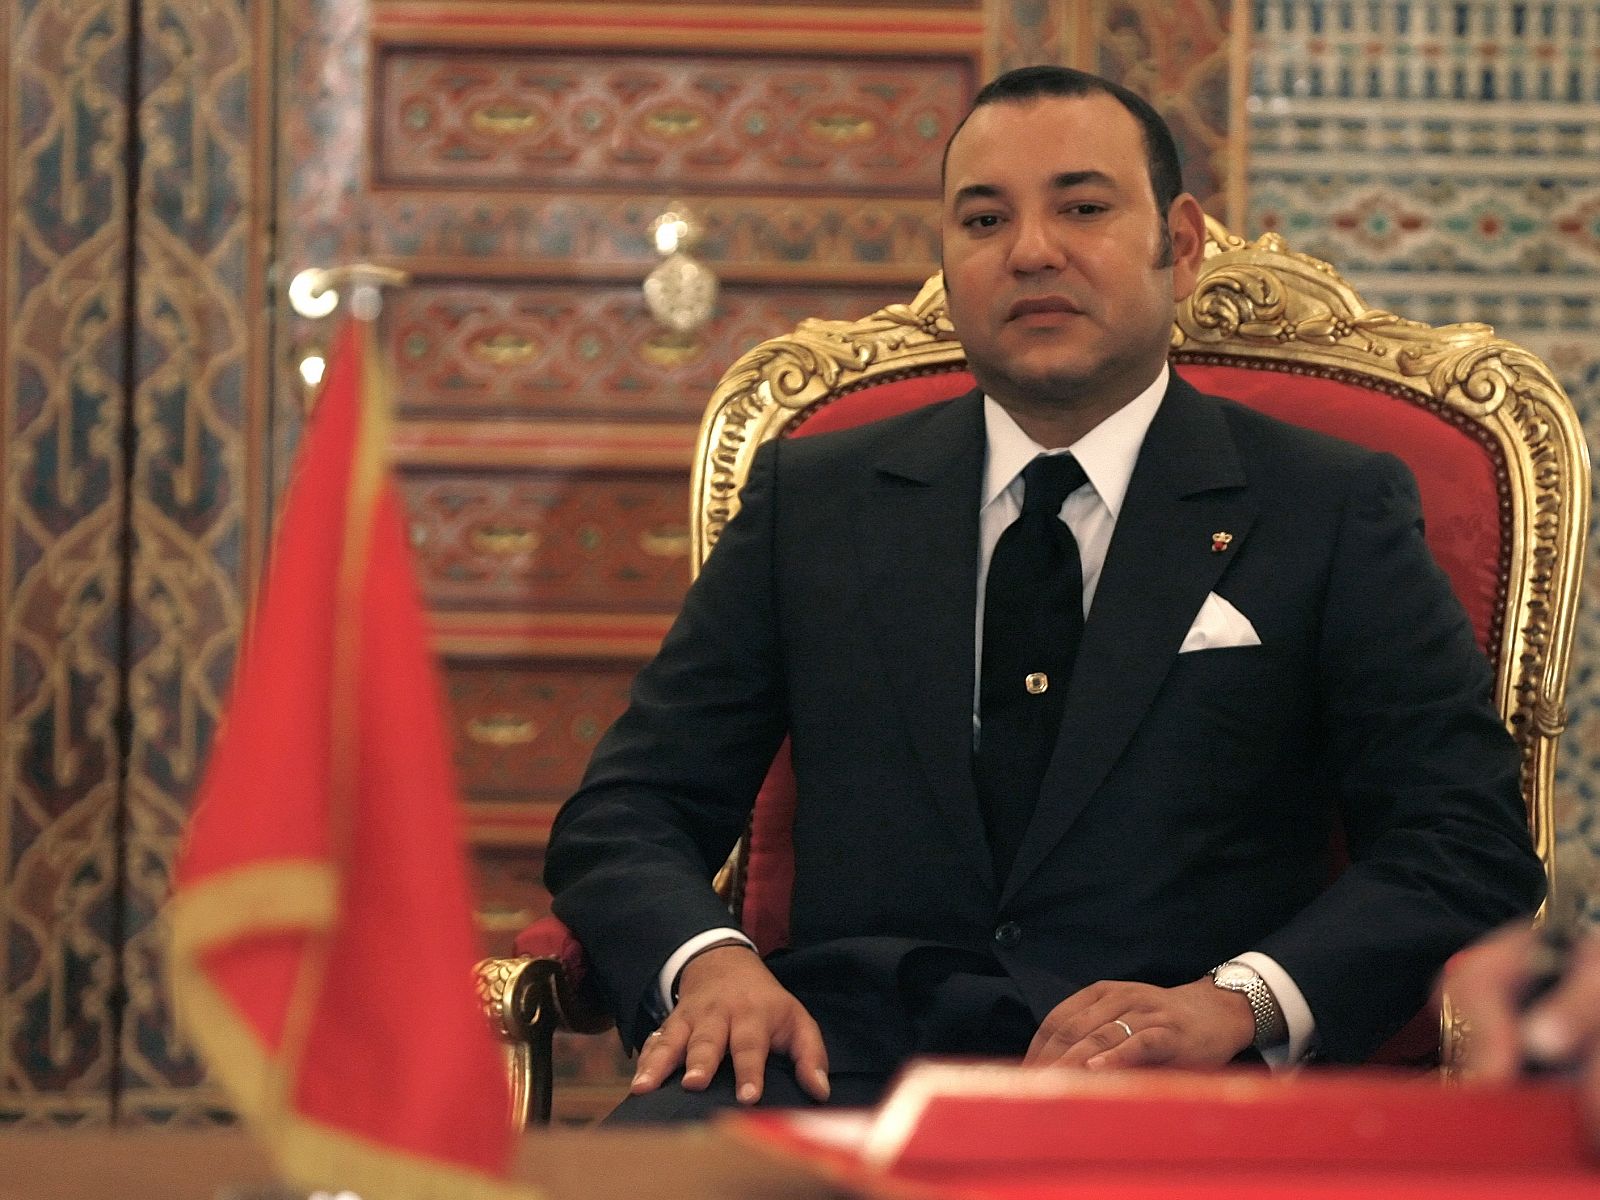 Morocco King France's Mohamed VI attends a signing ceremony at the Royal Palace in Marrakech